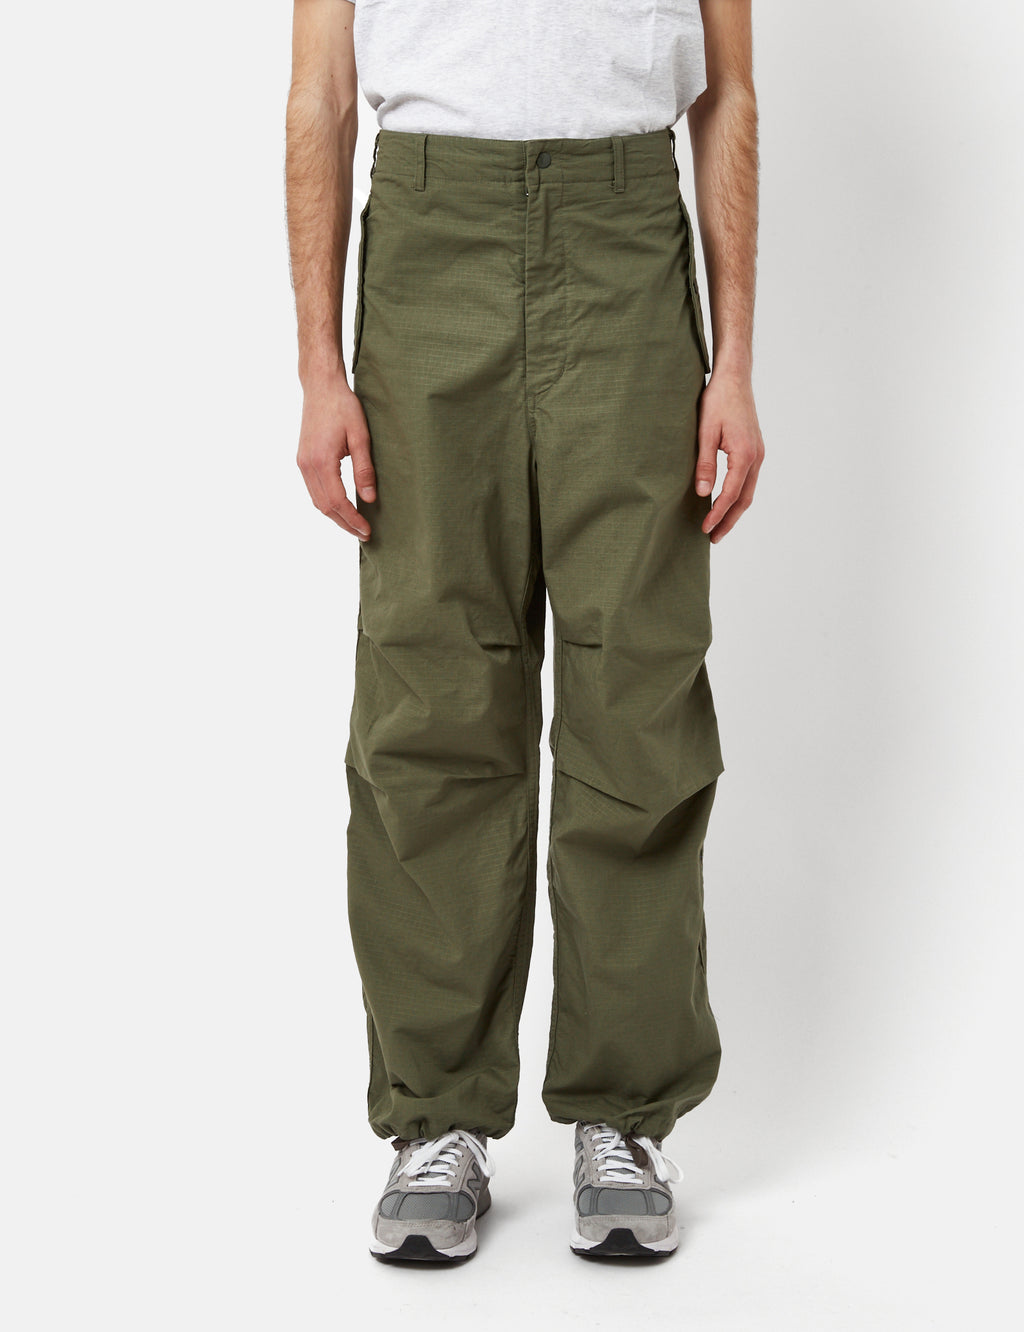 Engineered Garments Ripstop Over Pant (Relaxed) - Olive Green